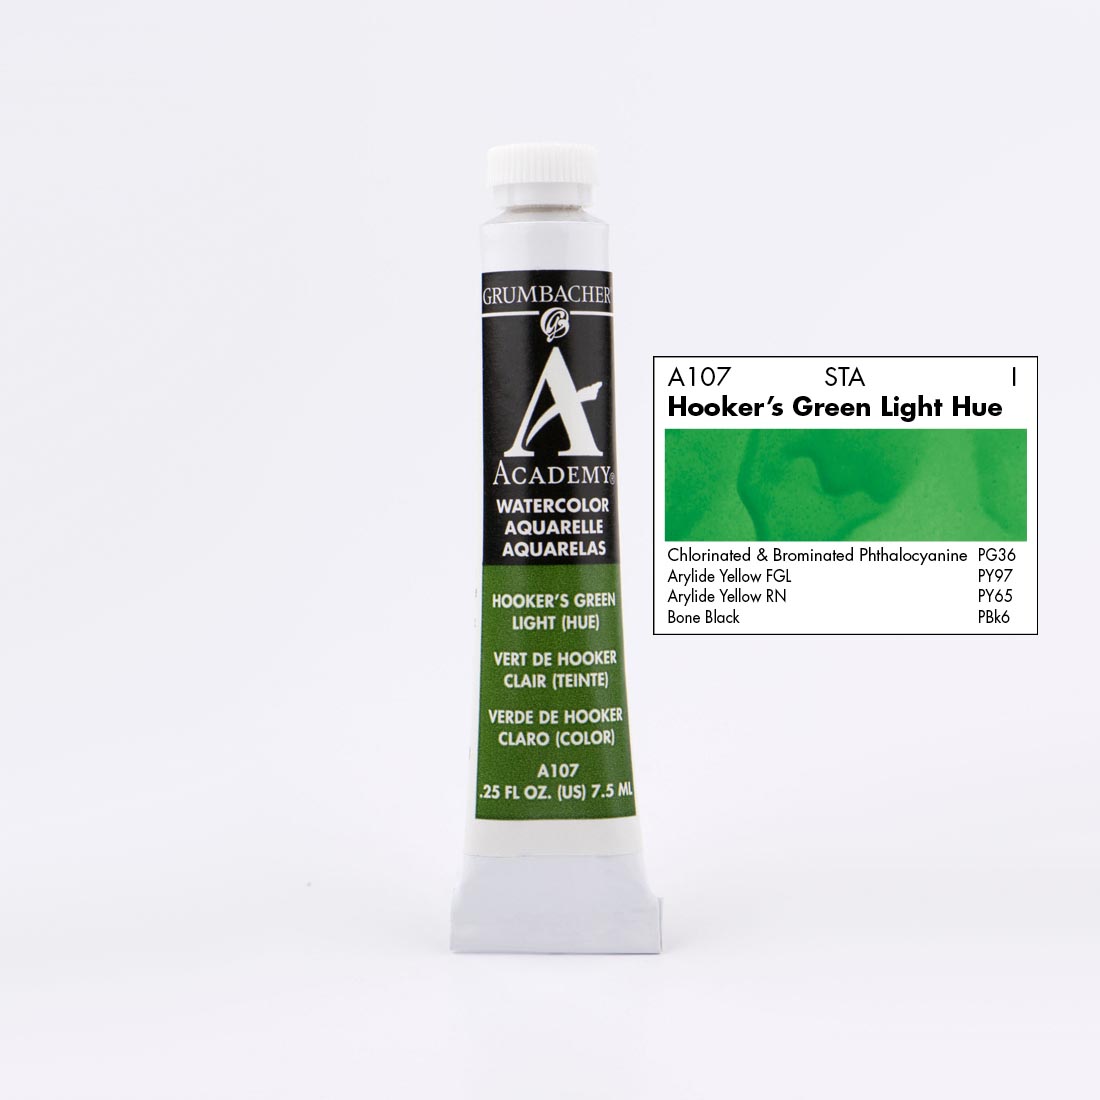 Tube of Grumbacher Academy Watercolor beside Hooker's Green Light Hue color swatch